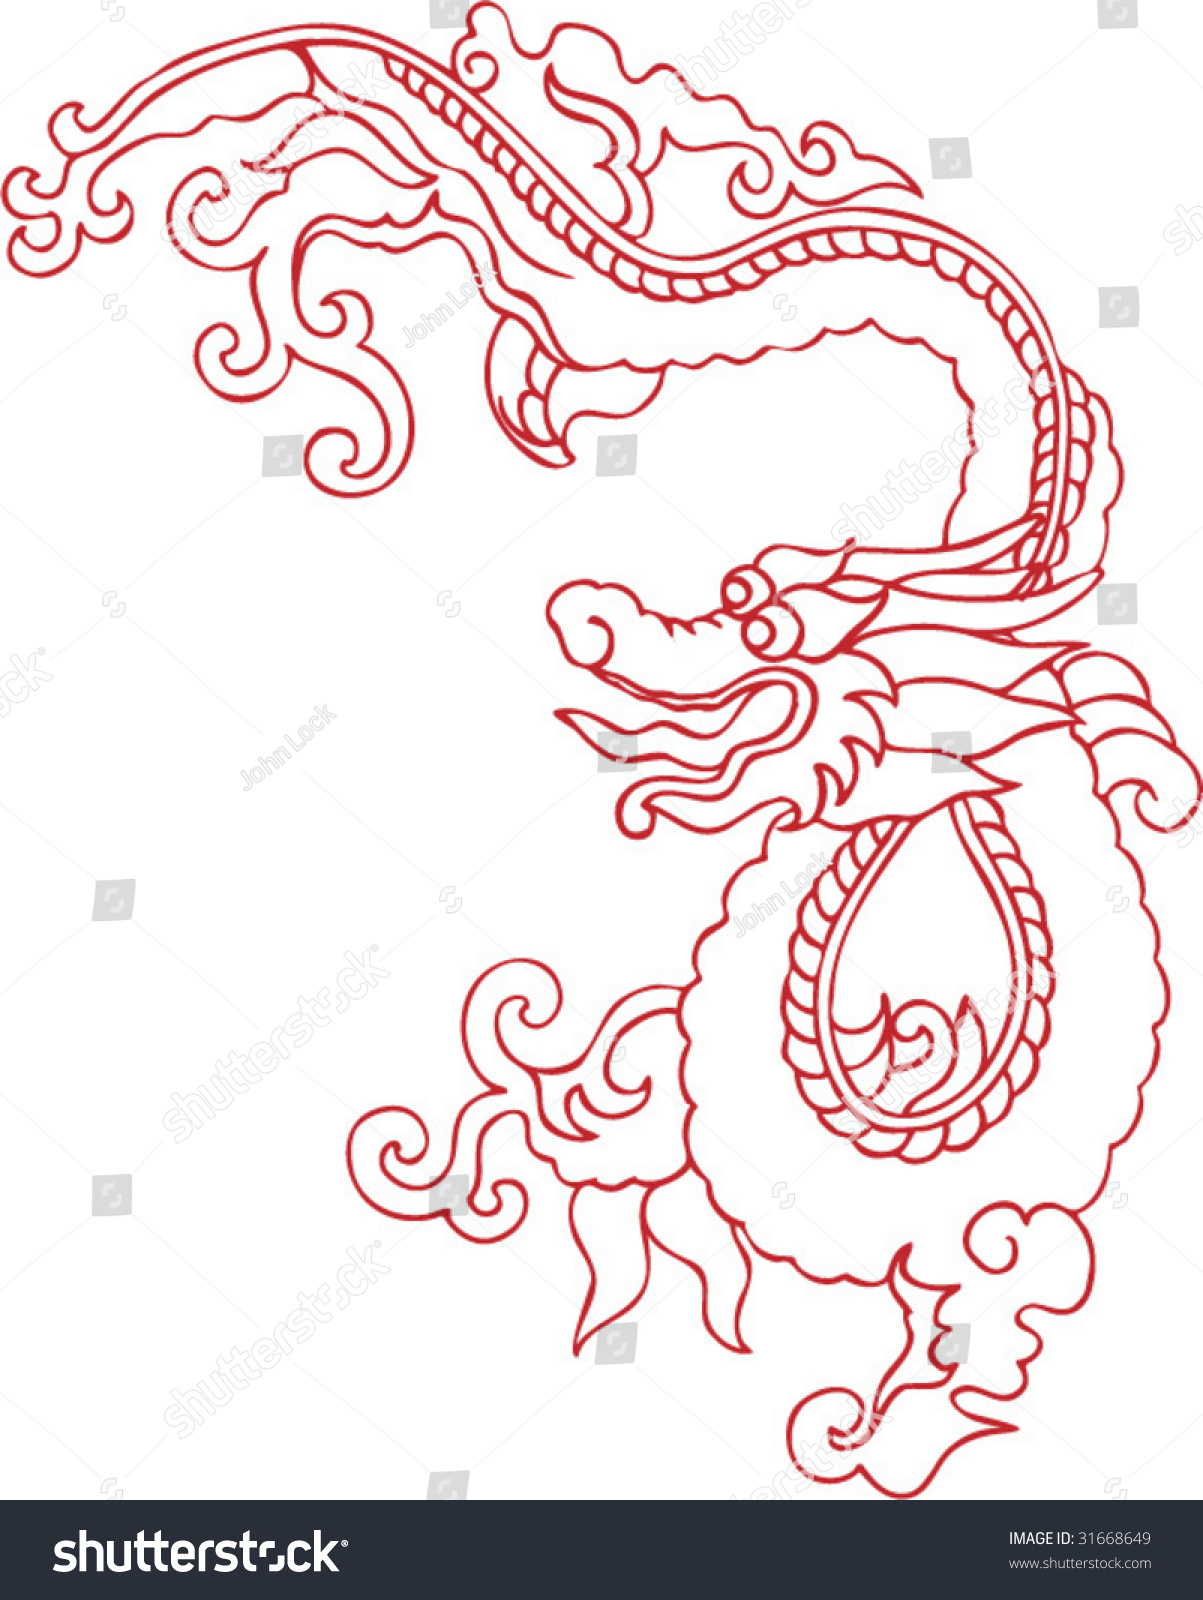 Vector Of Ancient Chinese Dragon Pattern - 31668649 : Shutterstock